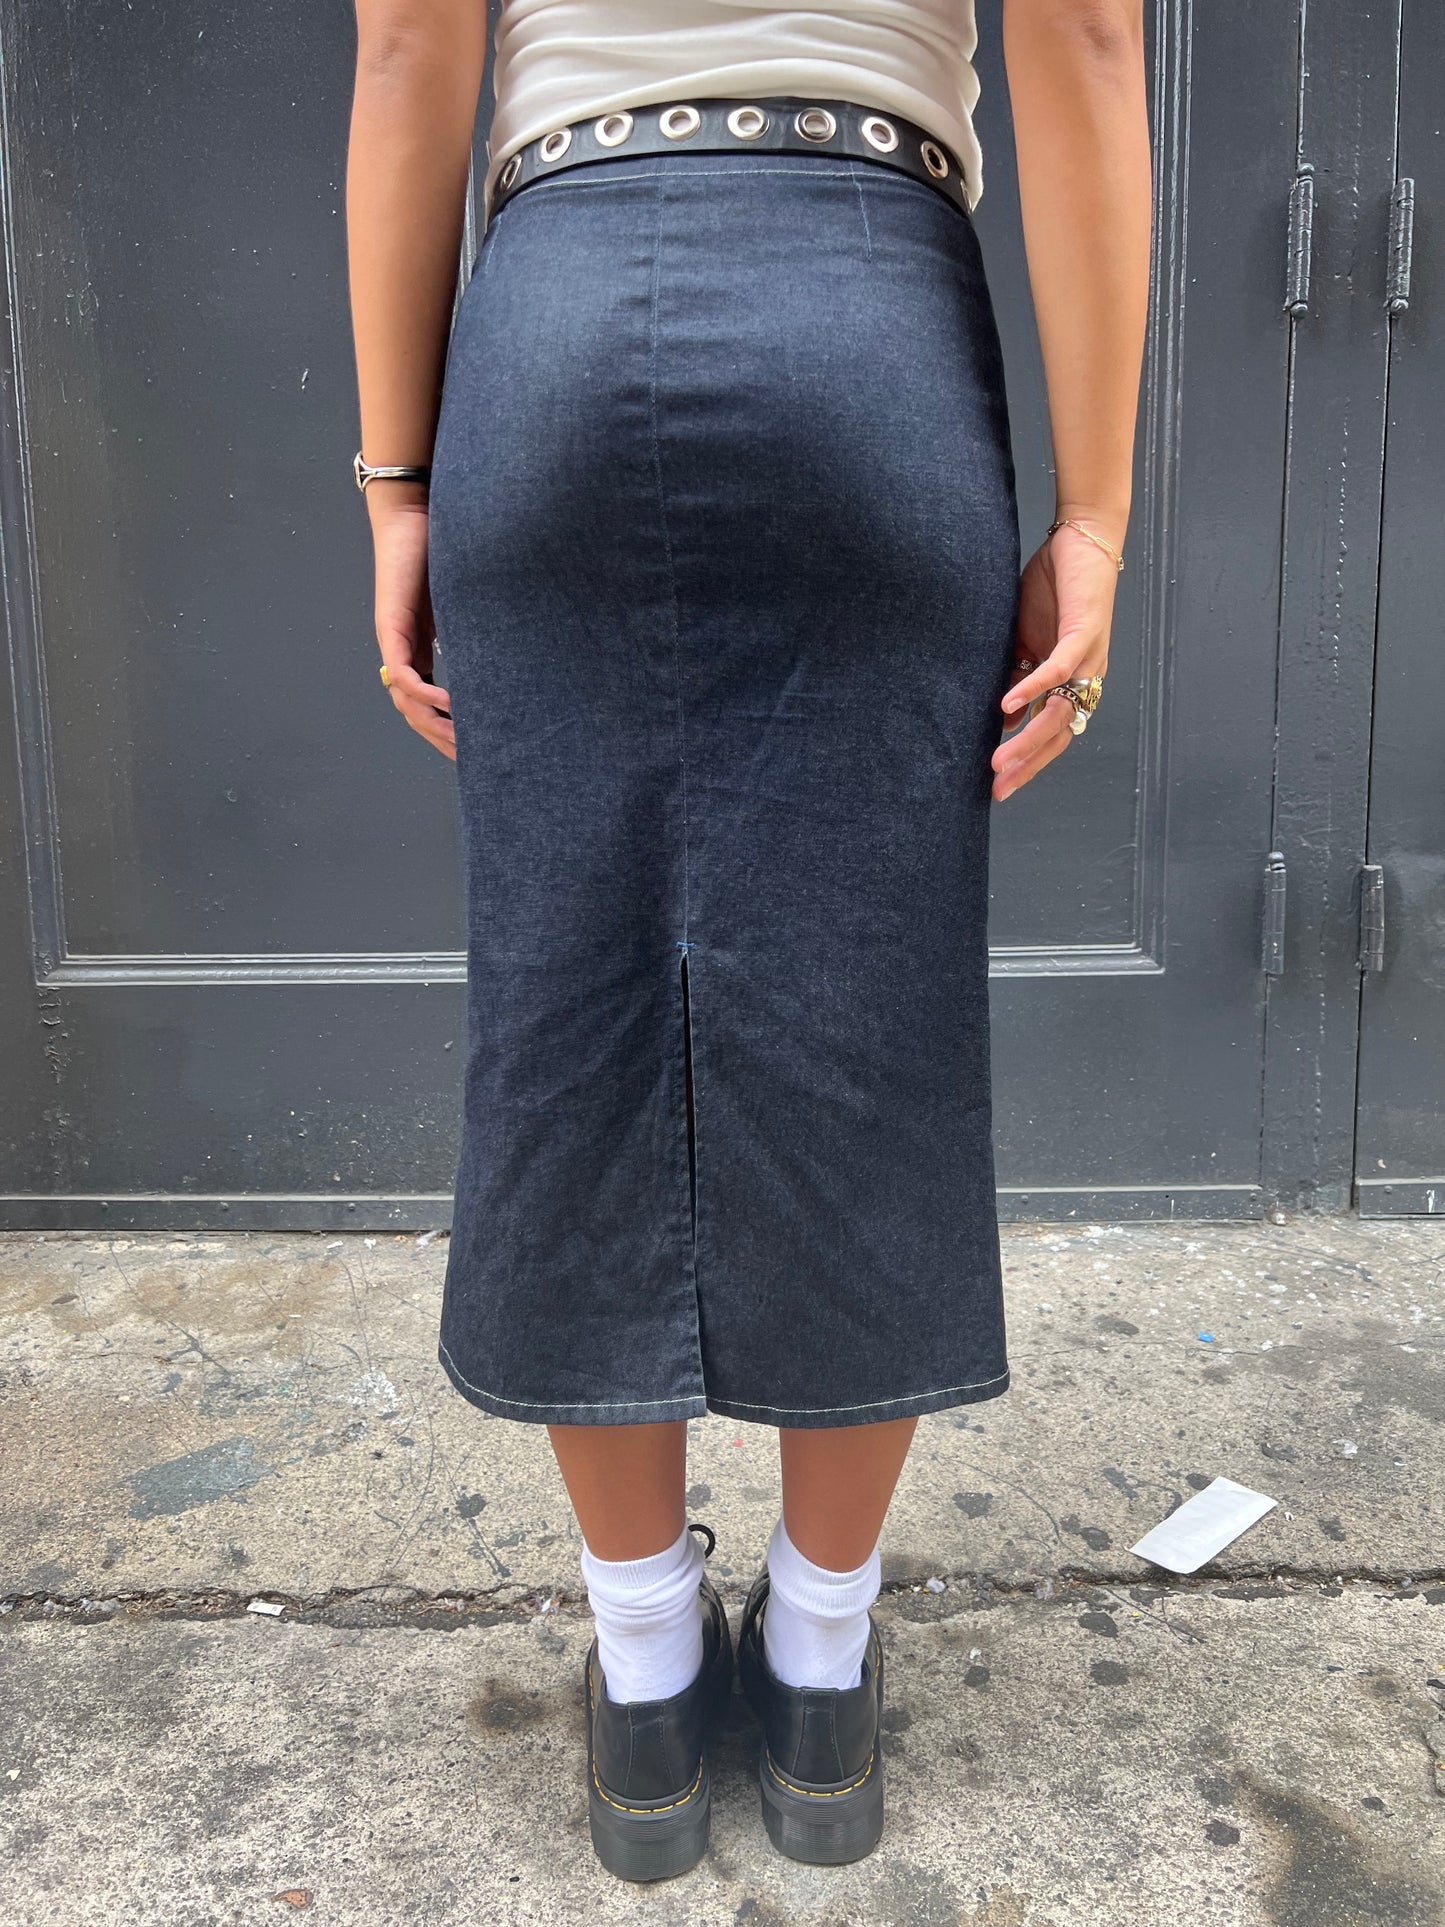 Gas Jeans Chambray Skirt - 26"